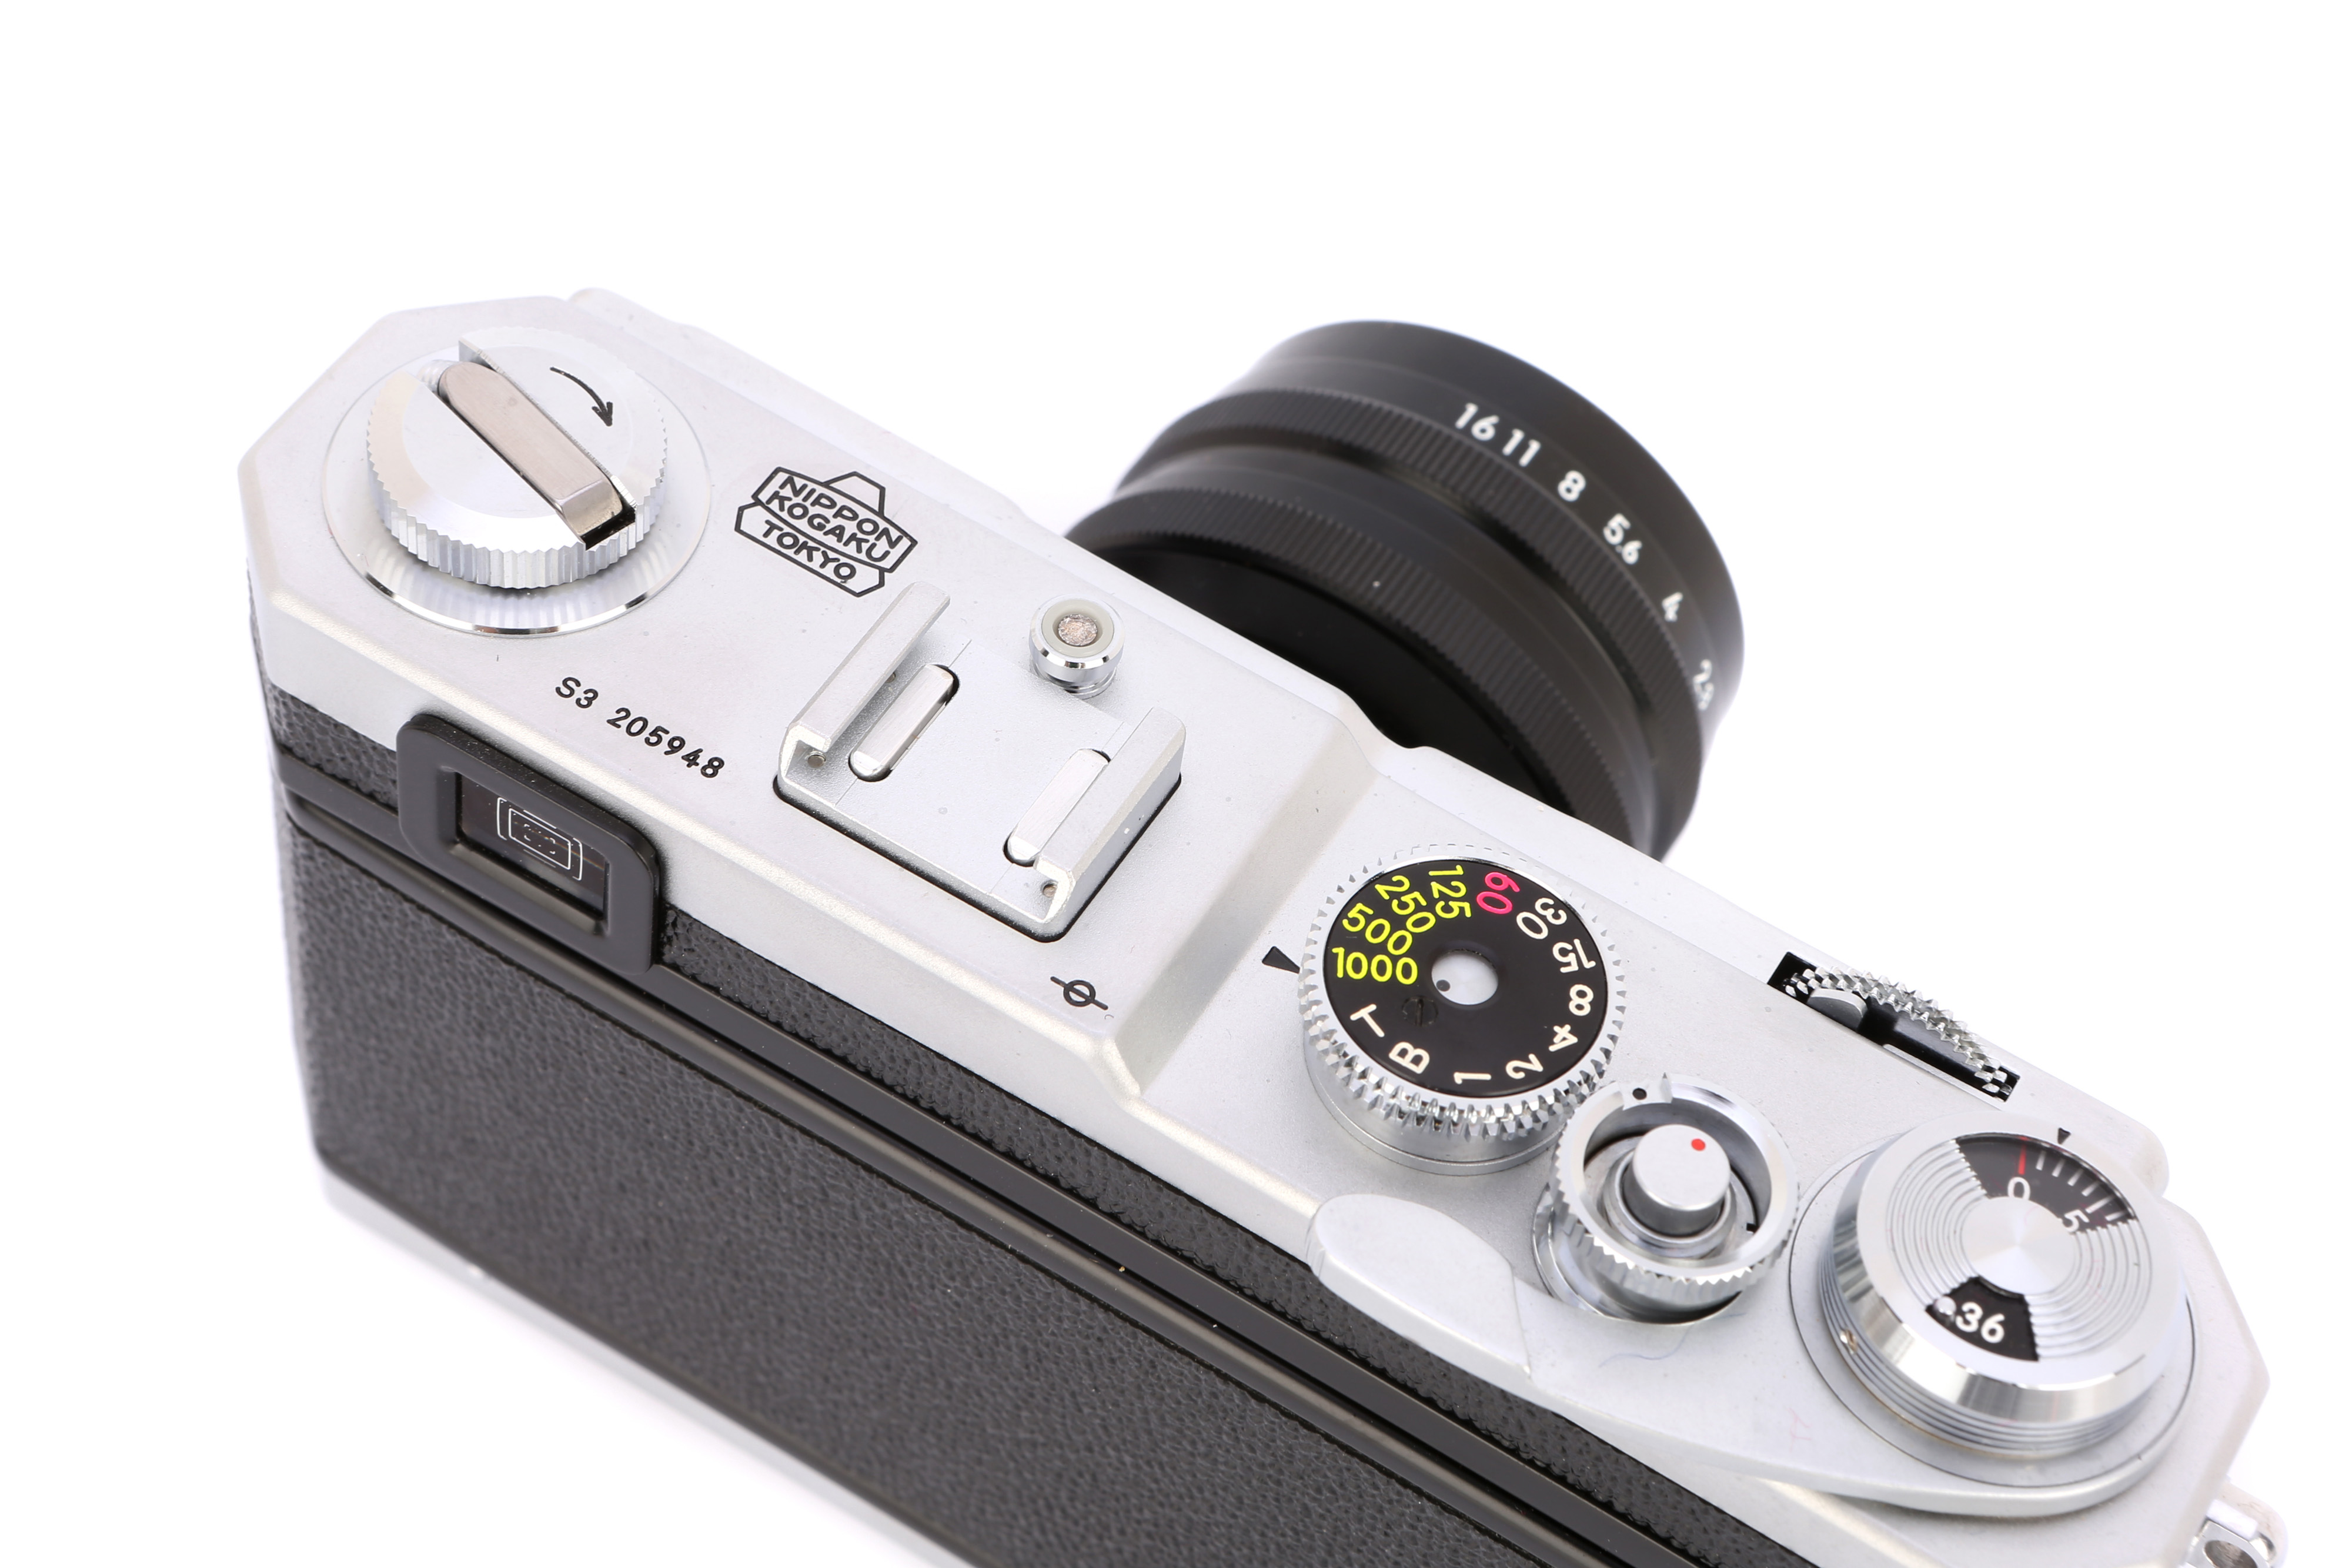 Lot 279 - A Nikon S3 Year 2000 Limited Edition